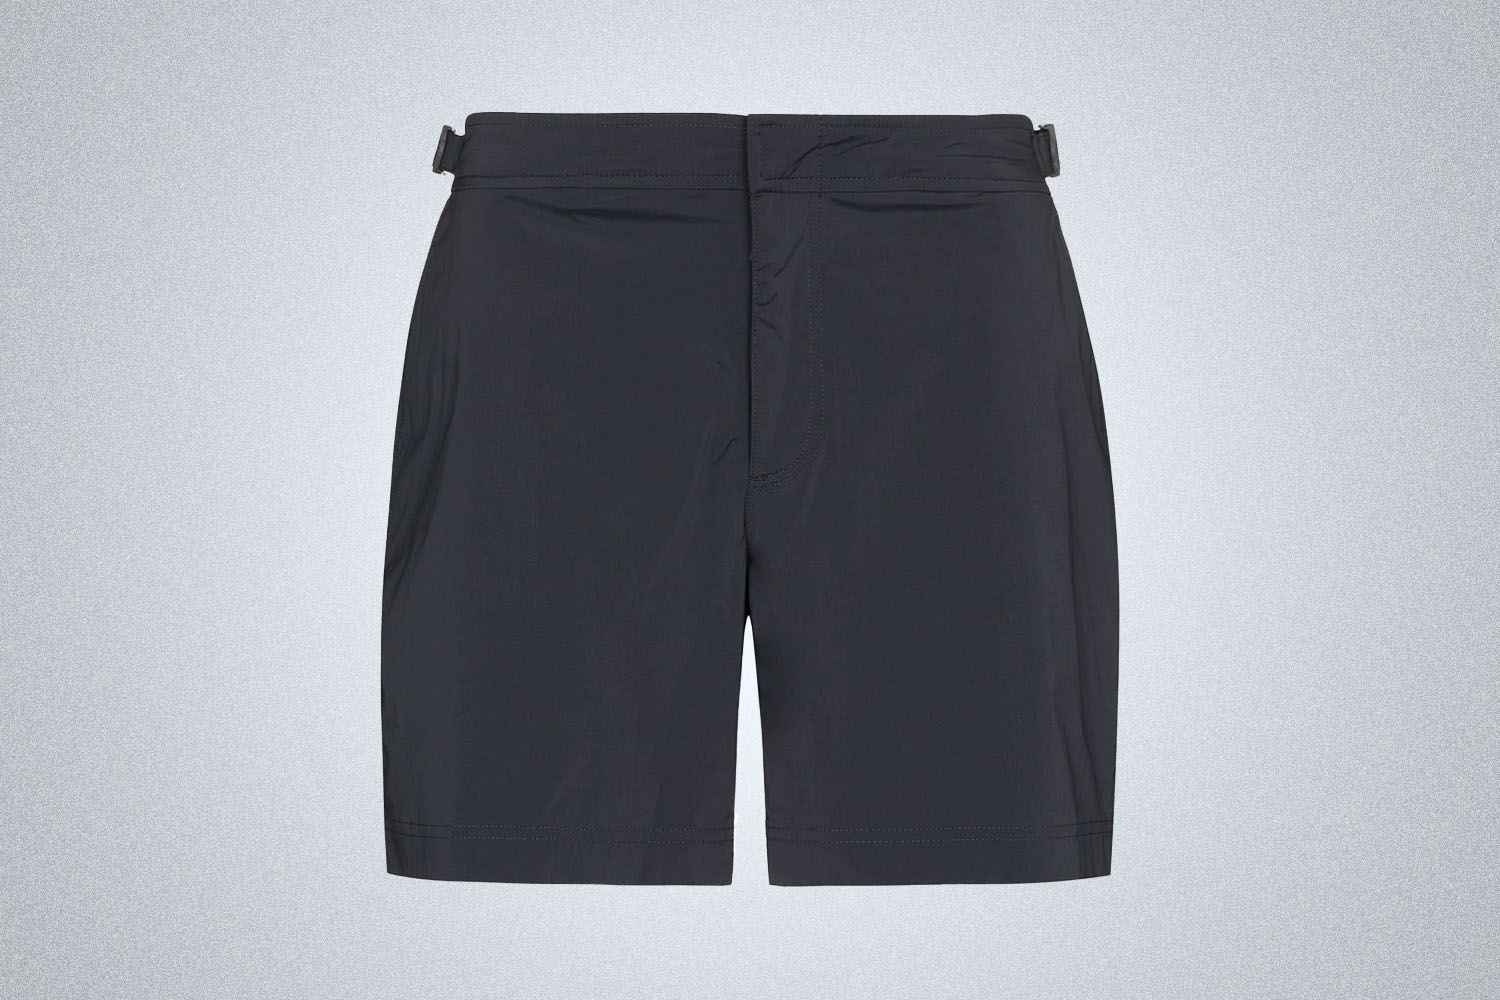 a pair of navy swim trunks from Orlebar Brown on a grey backgroud